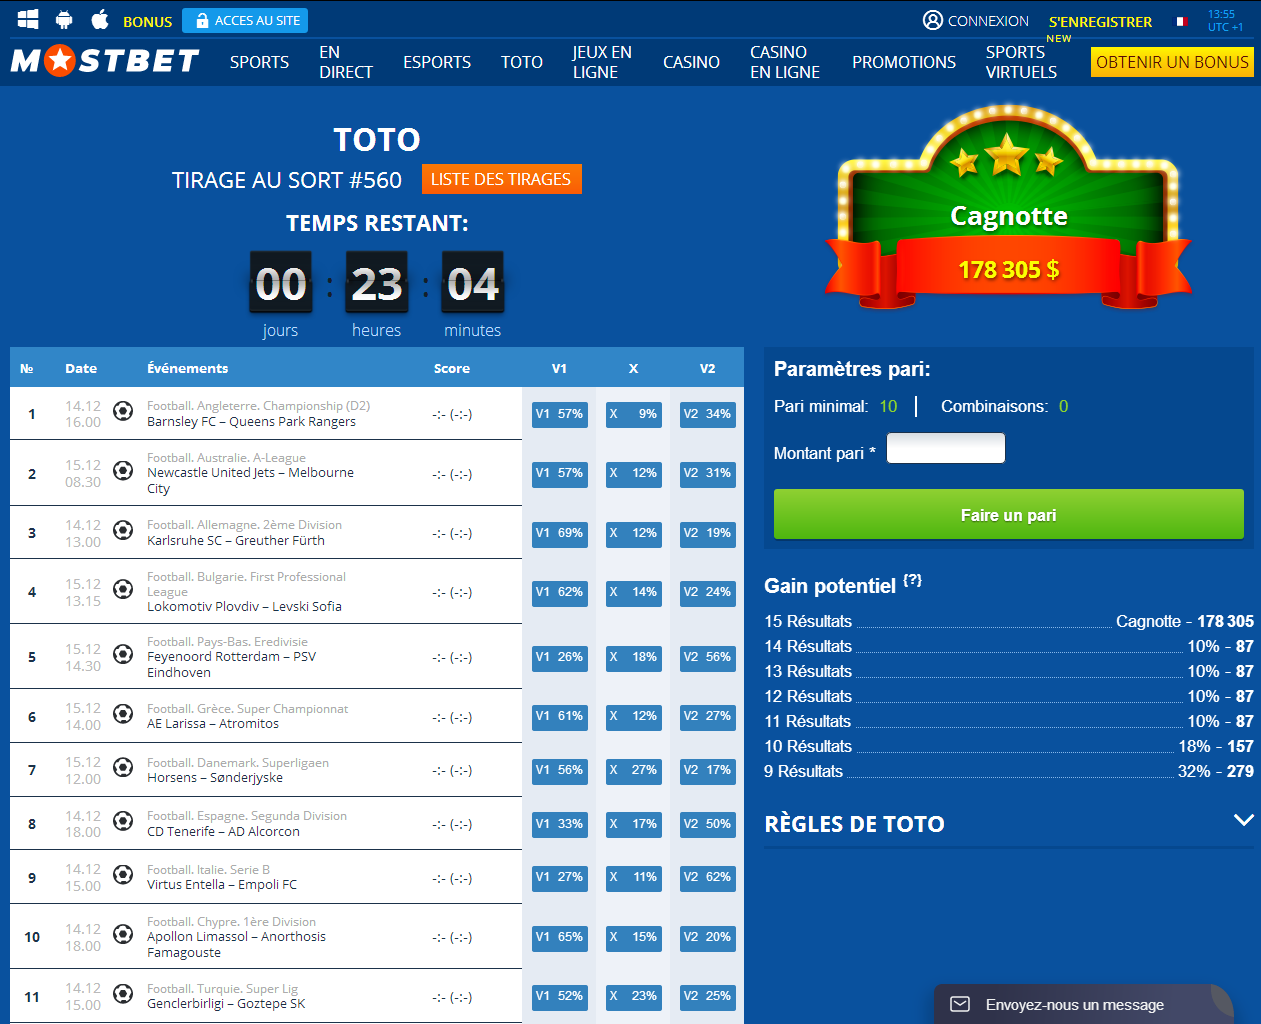 Mostbet Toto Betting